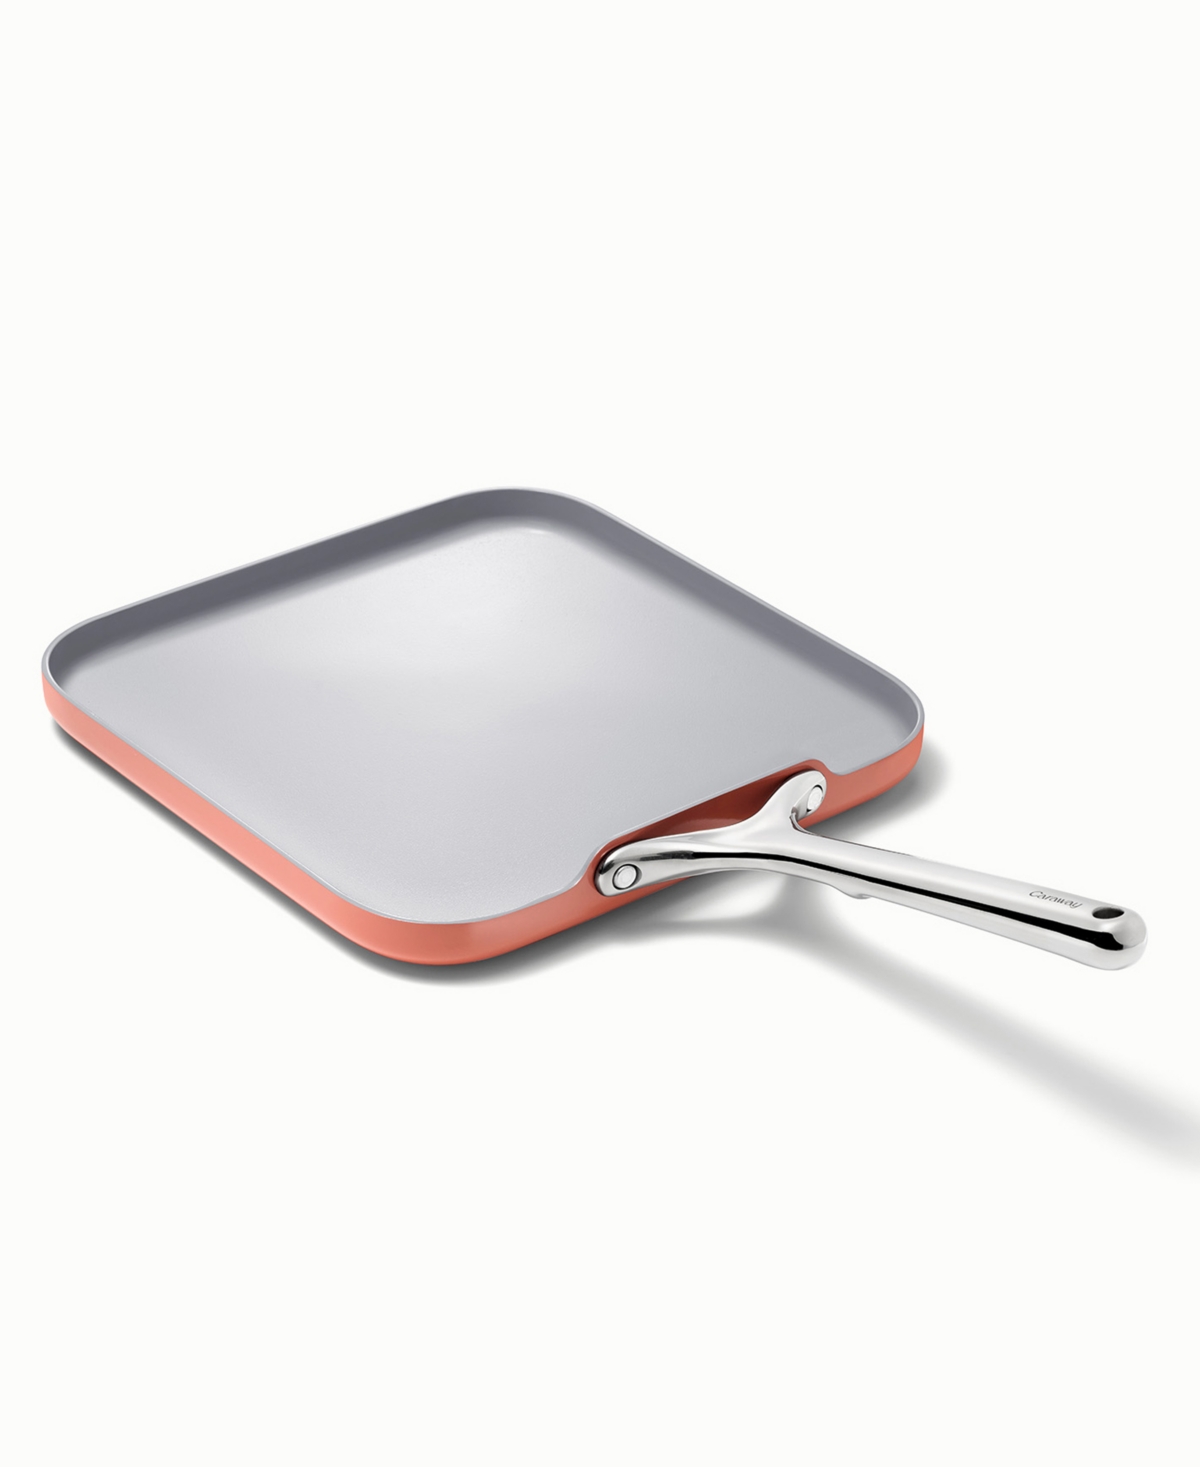 Caraway Non-stick Ceramic-coated 11" Square Griddle Pan In Perracotta